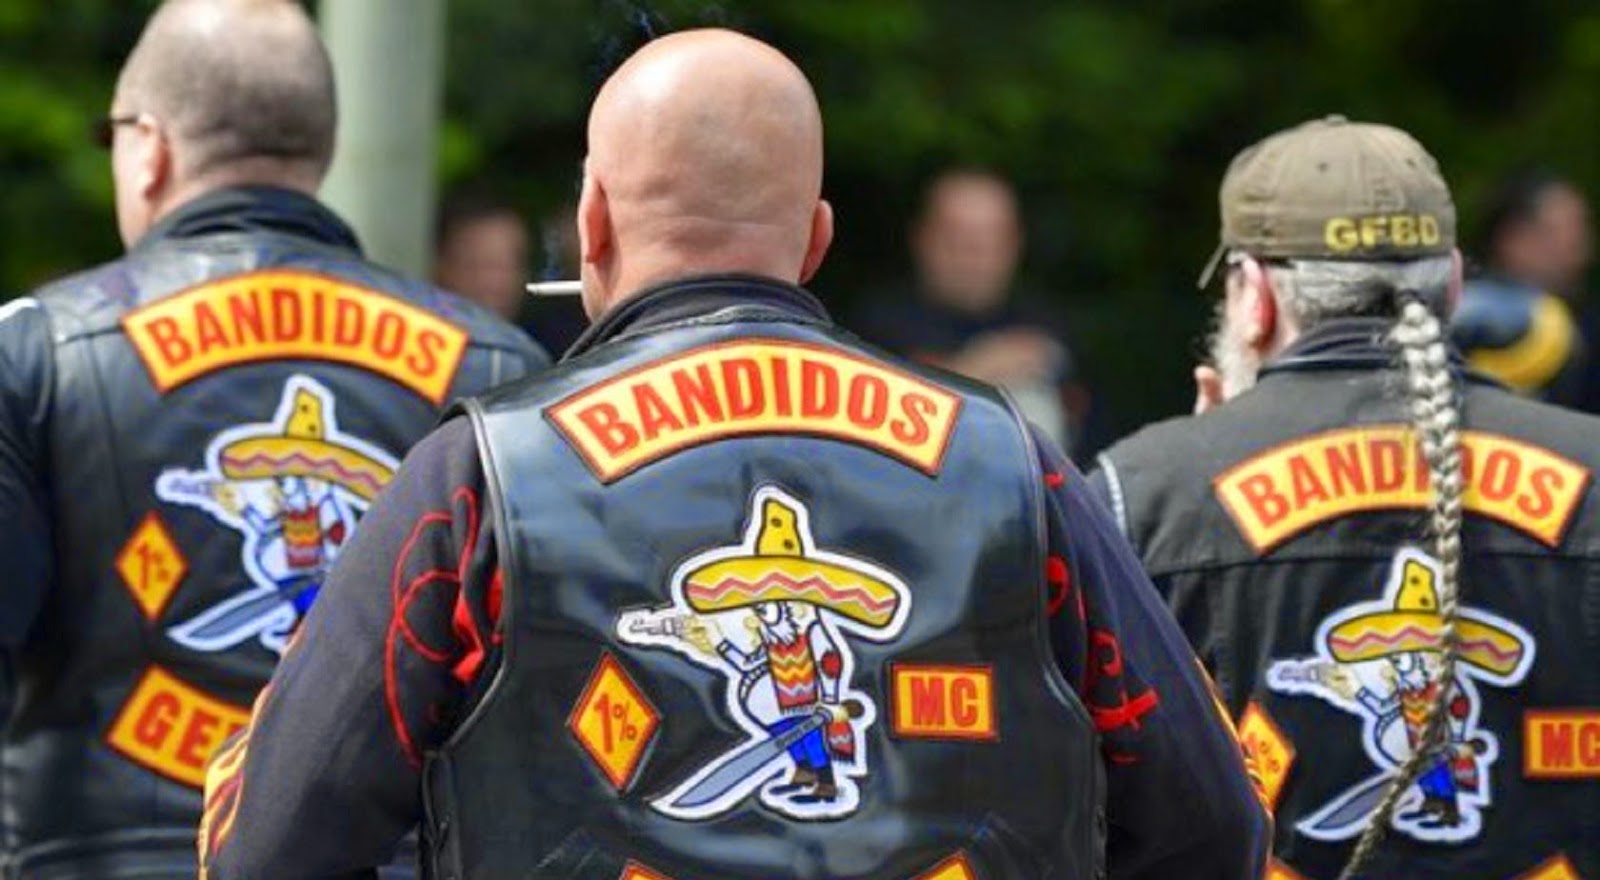 Motorcycle Event News Bandidos Nation In The News In Albuquerque And 